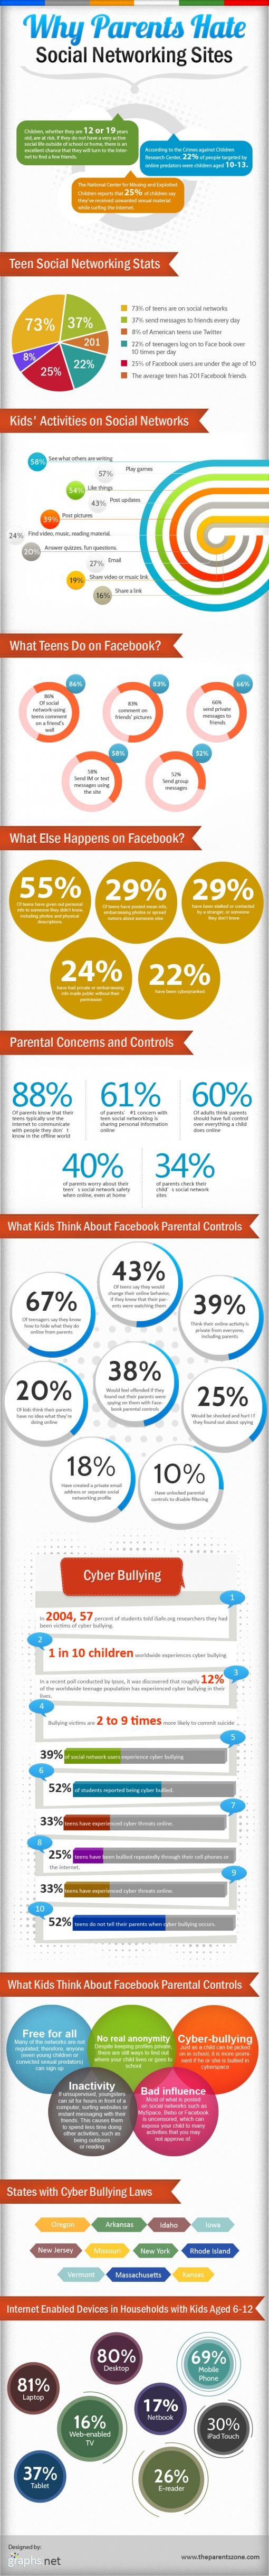 why-parents-hate-social-networking-sites.jpg